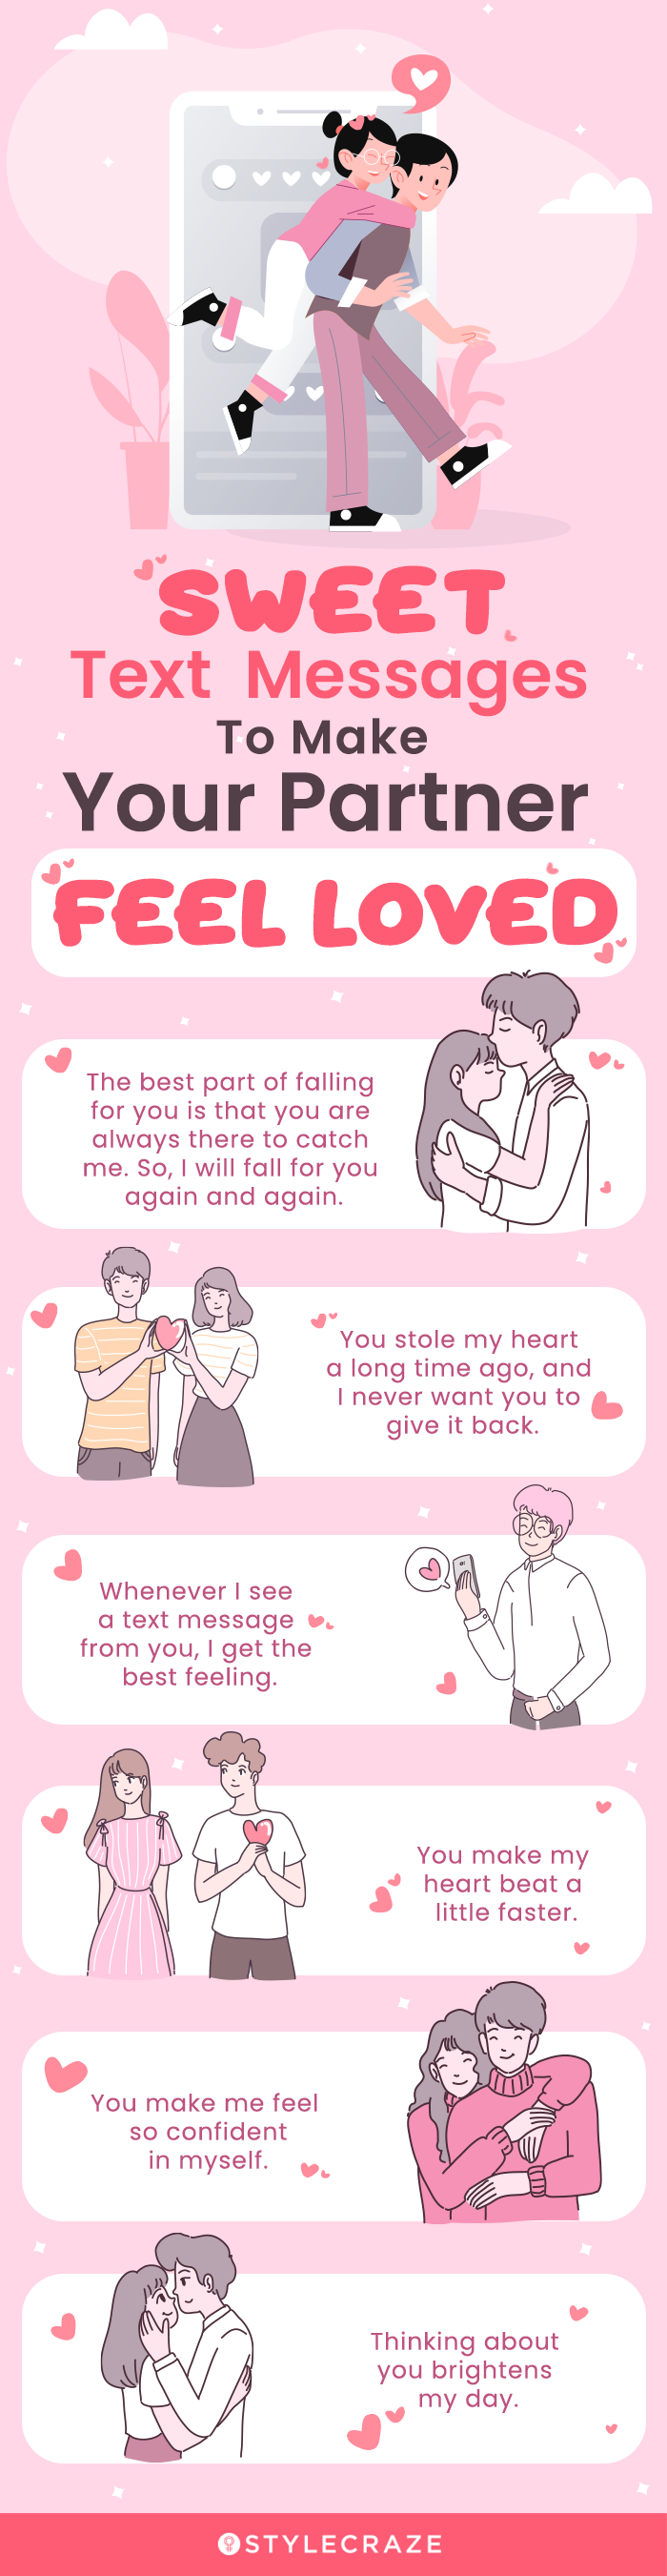 sweet text messages to make your partner feel loved (infographic)